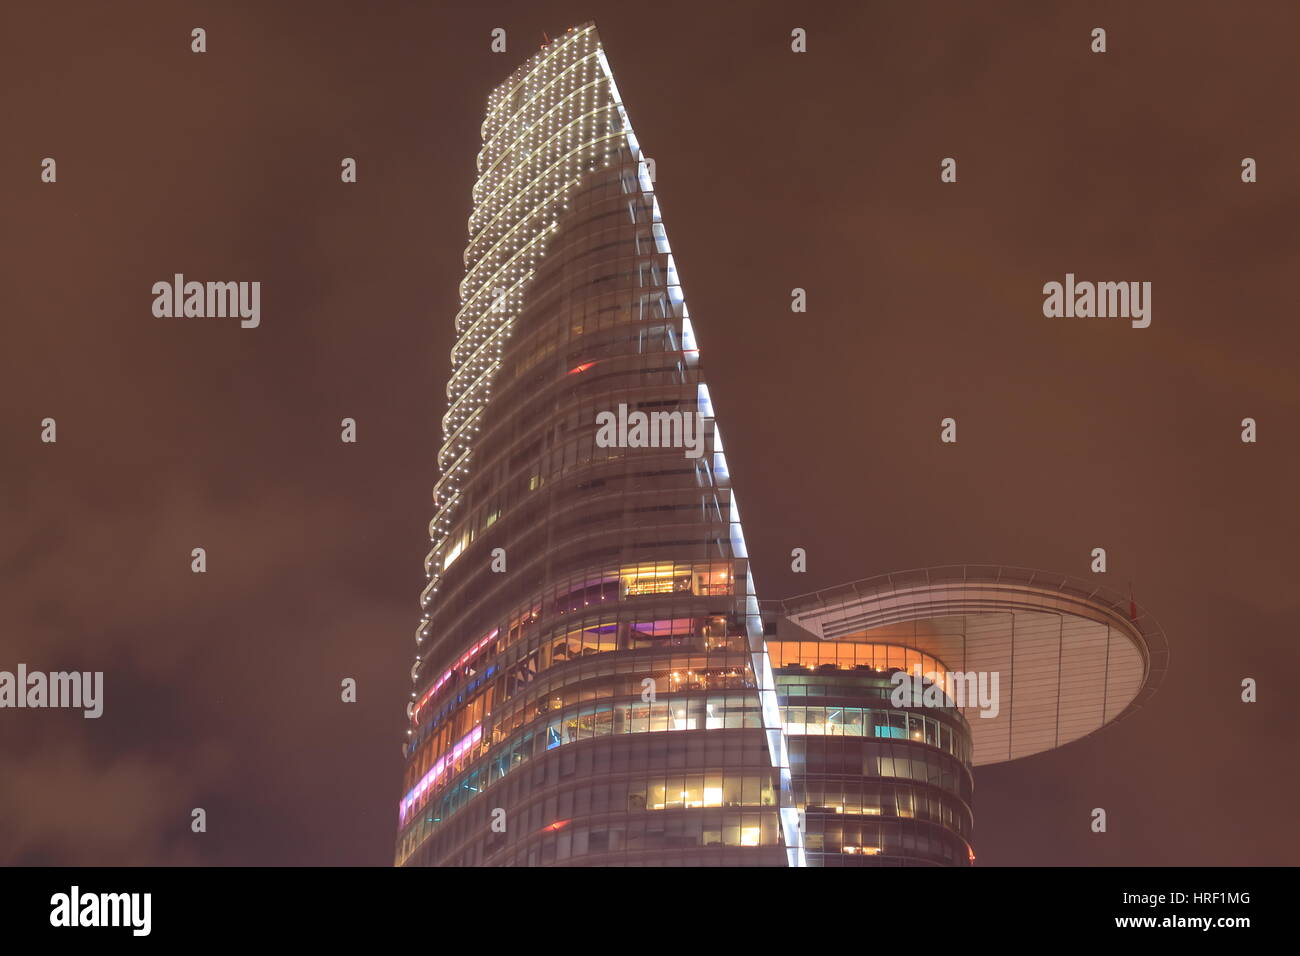 Bitexco Tower in Ho Chi Minh City Vietnam. Bitexco Tower is a 68 storey 262.5 m skyscraper built in 2011 Stock Photo